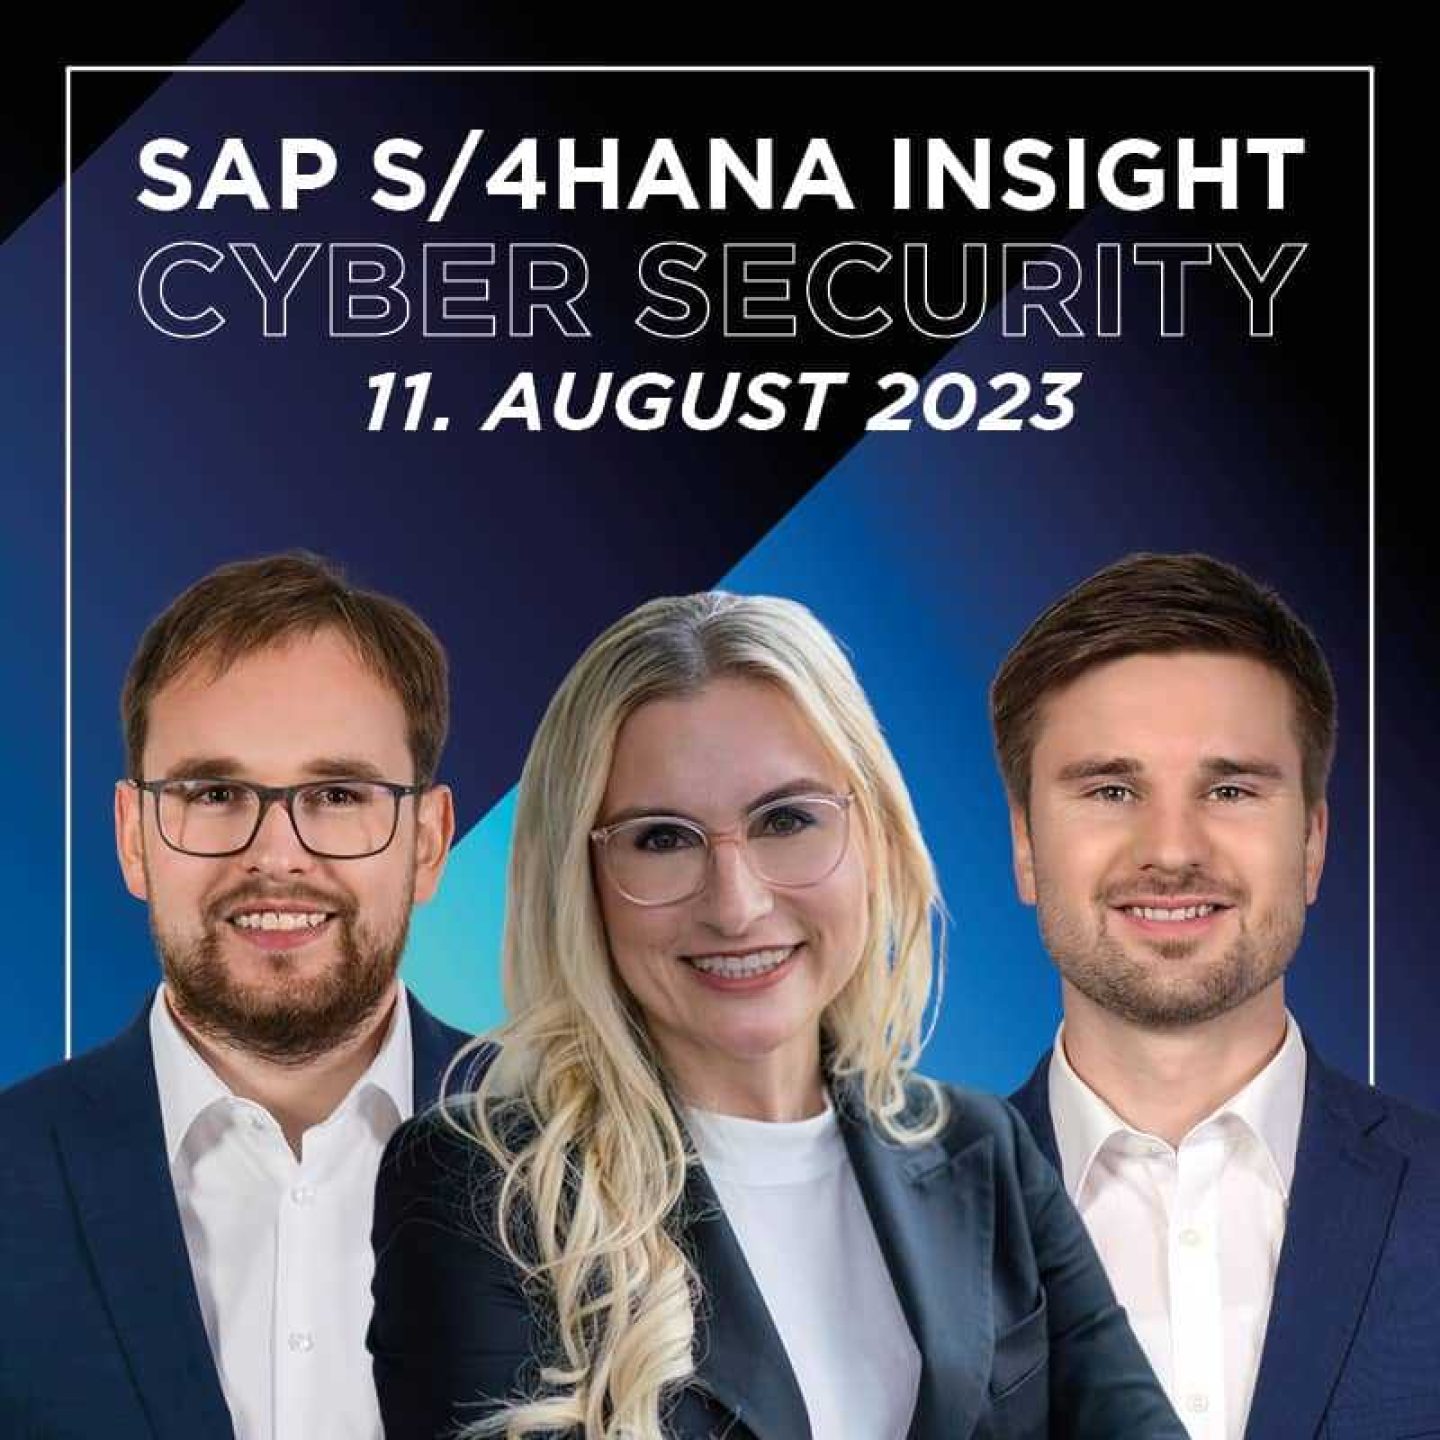 Teaser insight cyber security